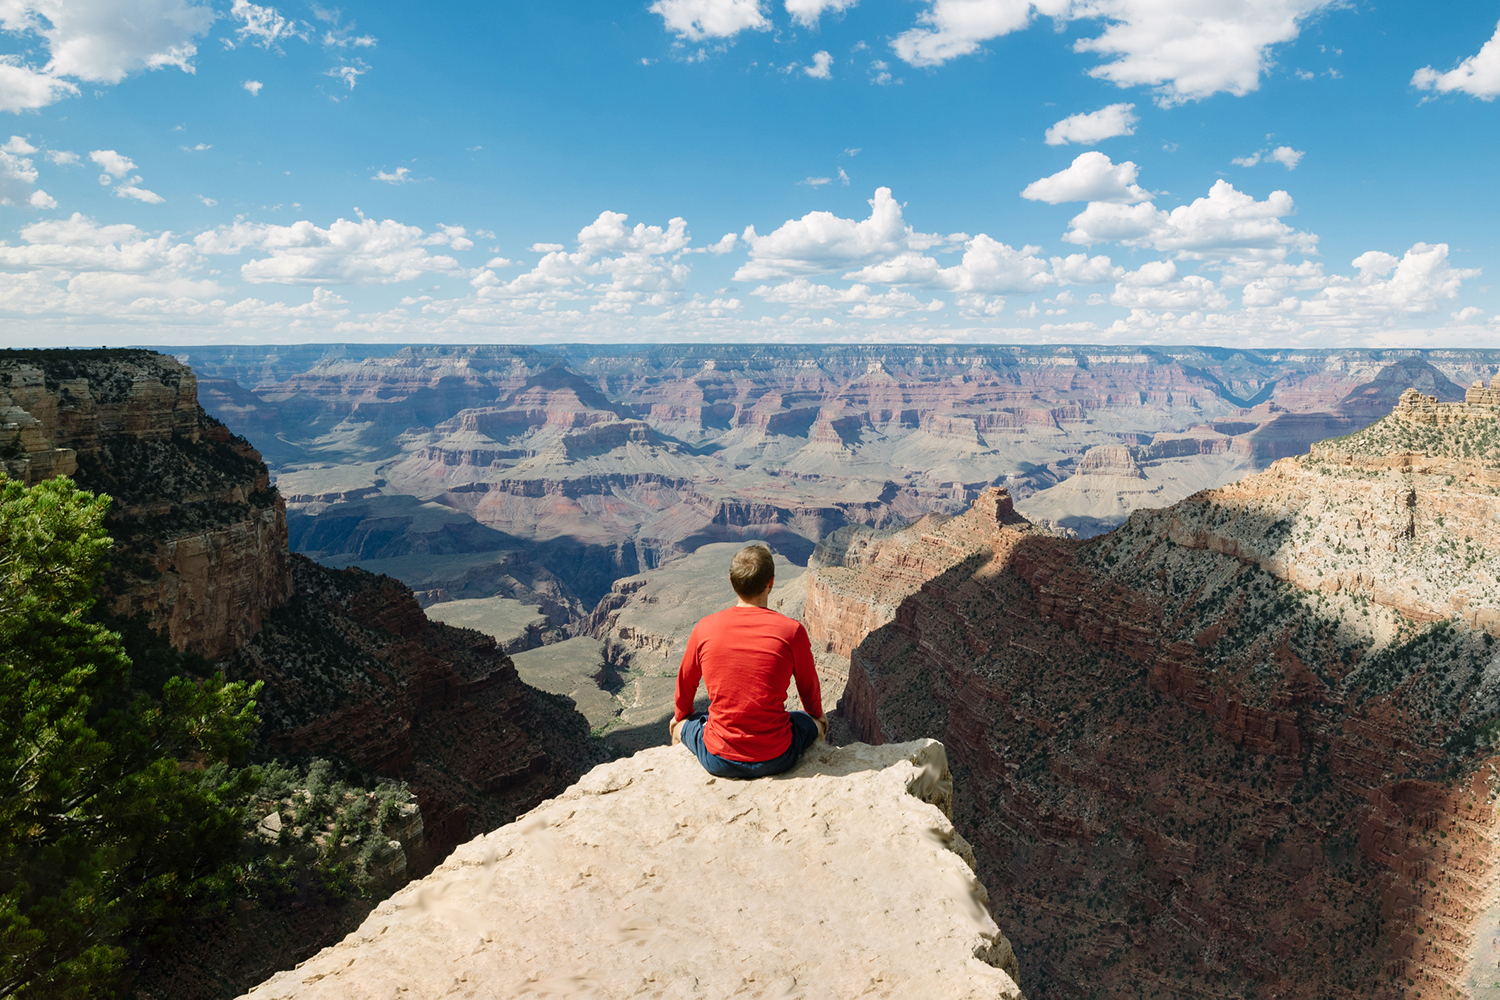 Man sits perched on the rim of epic canyon.